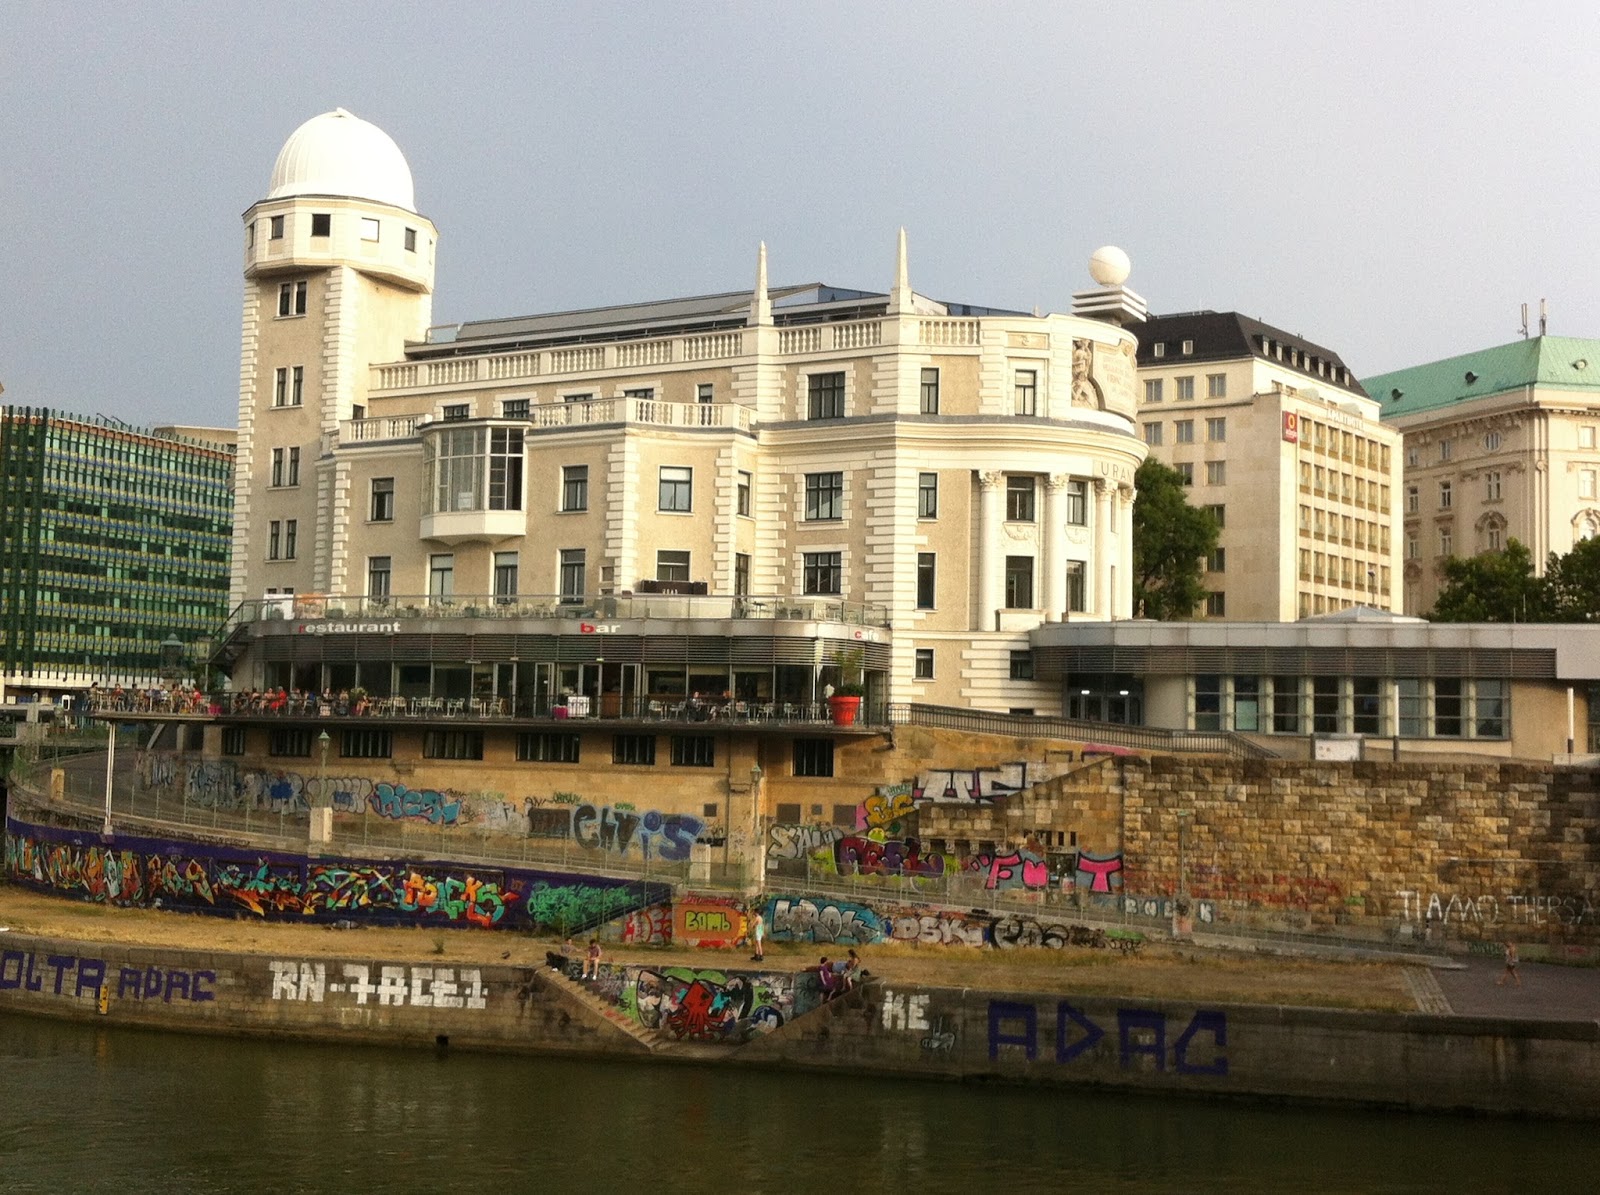 Urania building by the Danube canal 2